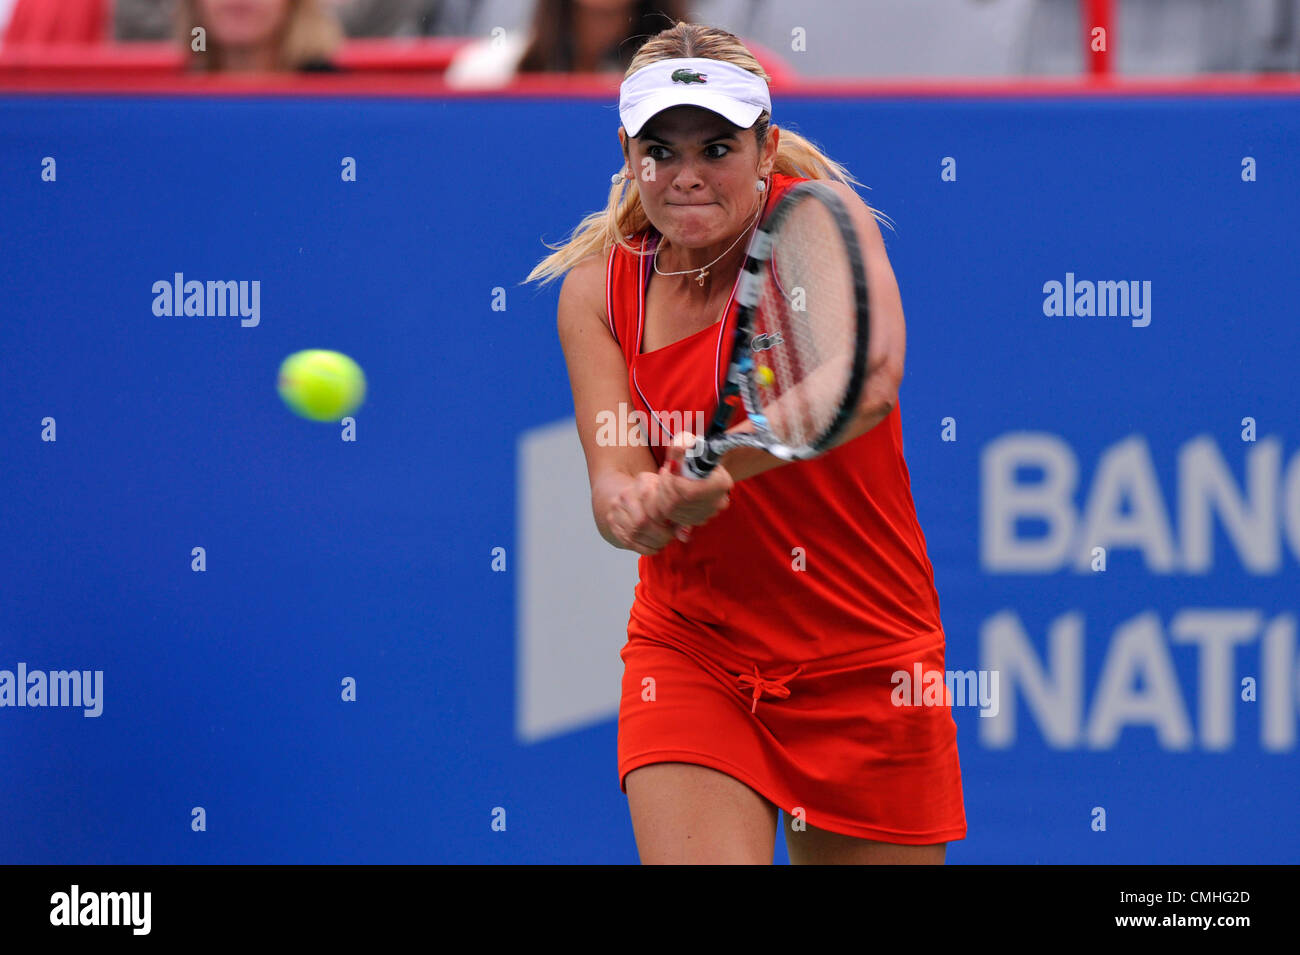 10th Aug 2012. 10.08.2012. Quebec, Canada.  Aleksandra Wozniak of Canada hits a return against Christina McHale of the USA during the Rogers Cup Presented By National Bank at Uniprix Stadium in Montreal, Quebec, Canada.  Game has been suspended due to rain. Stock Photo